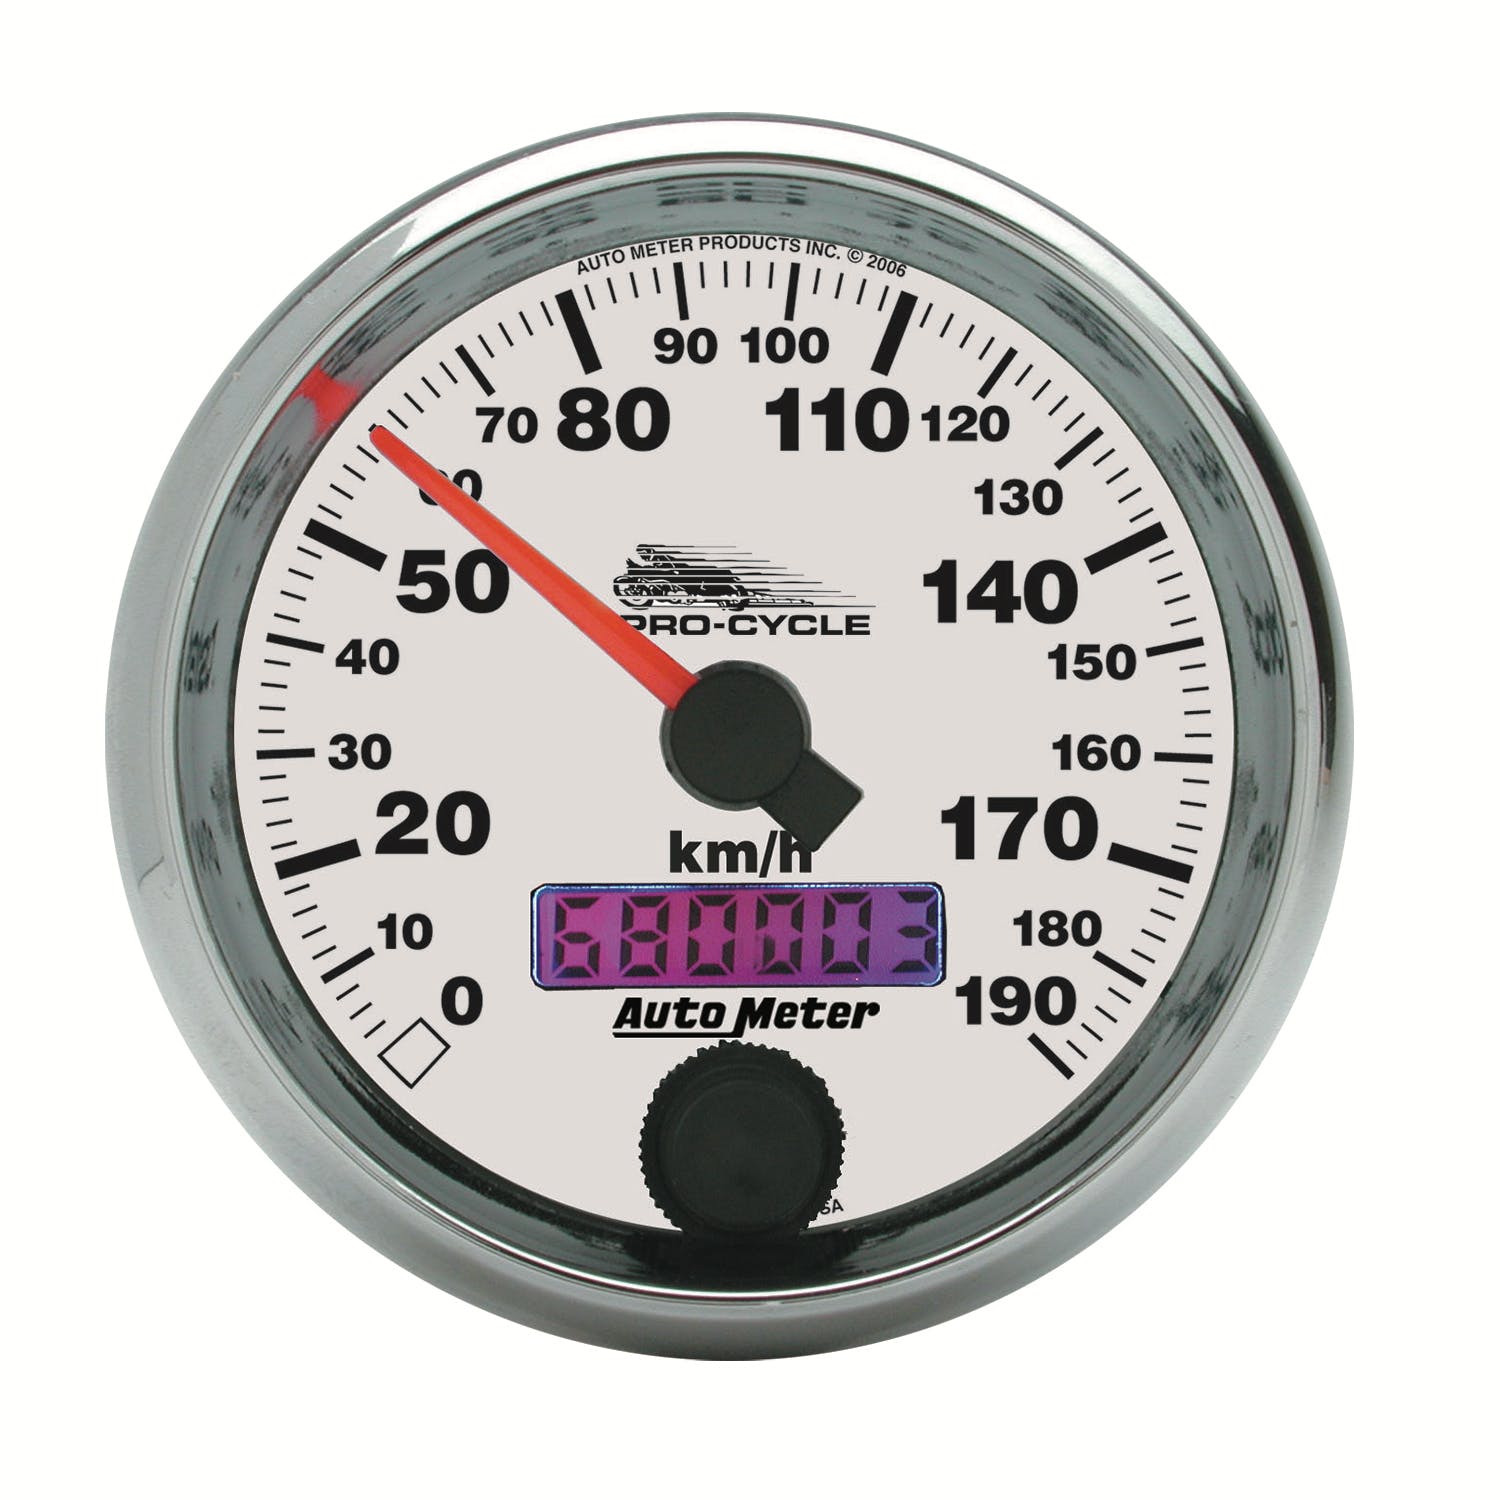 AutoMeter Products 19341-M Speedometer Gauge, Electric, White-Pro Cycle 2 5/8, 190 KMH